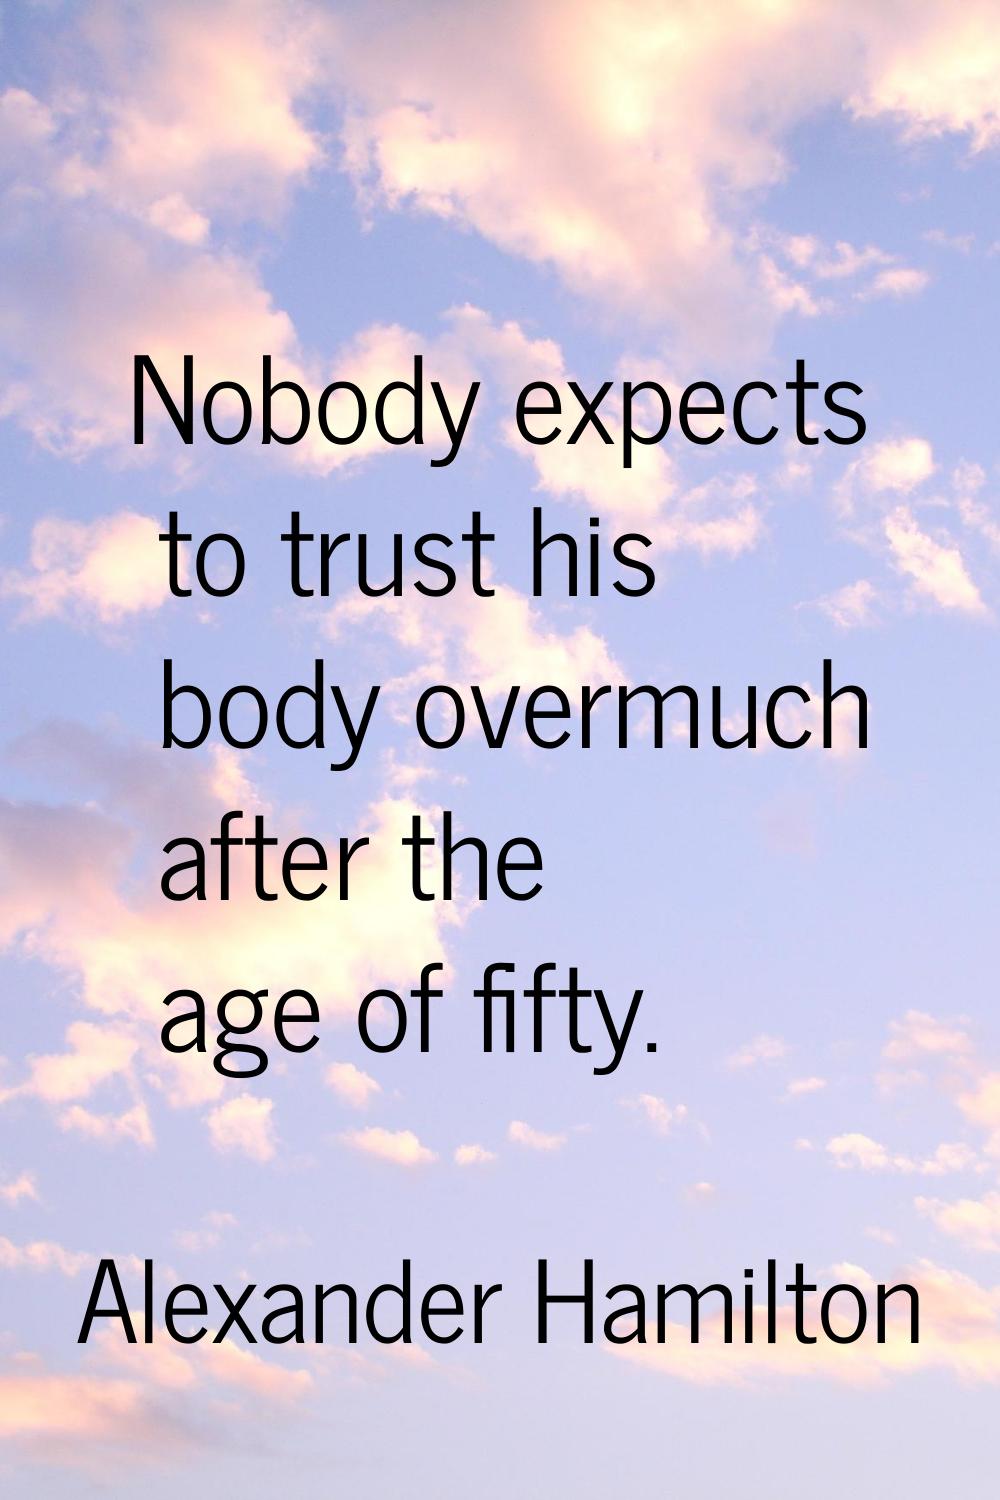 Nobody expects to trust his body overmuch after the age of fifty.